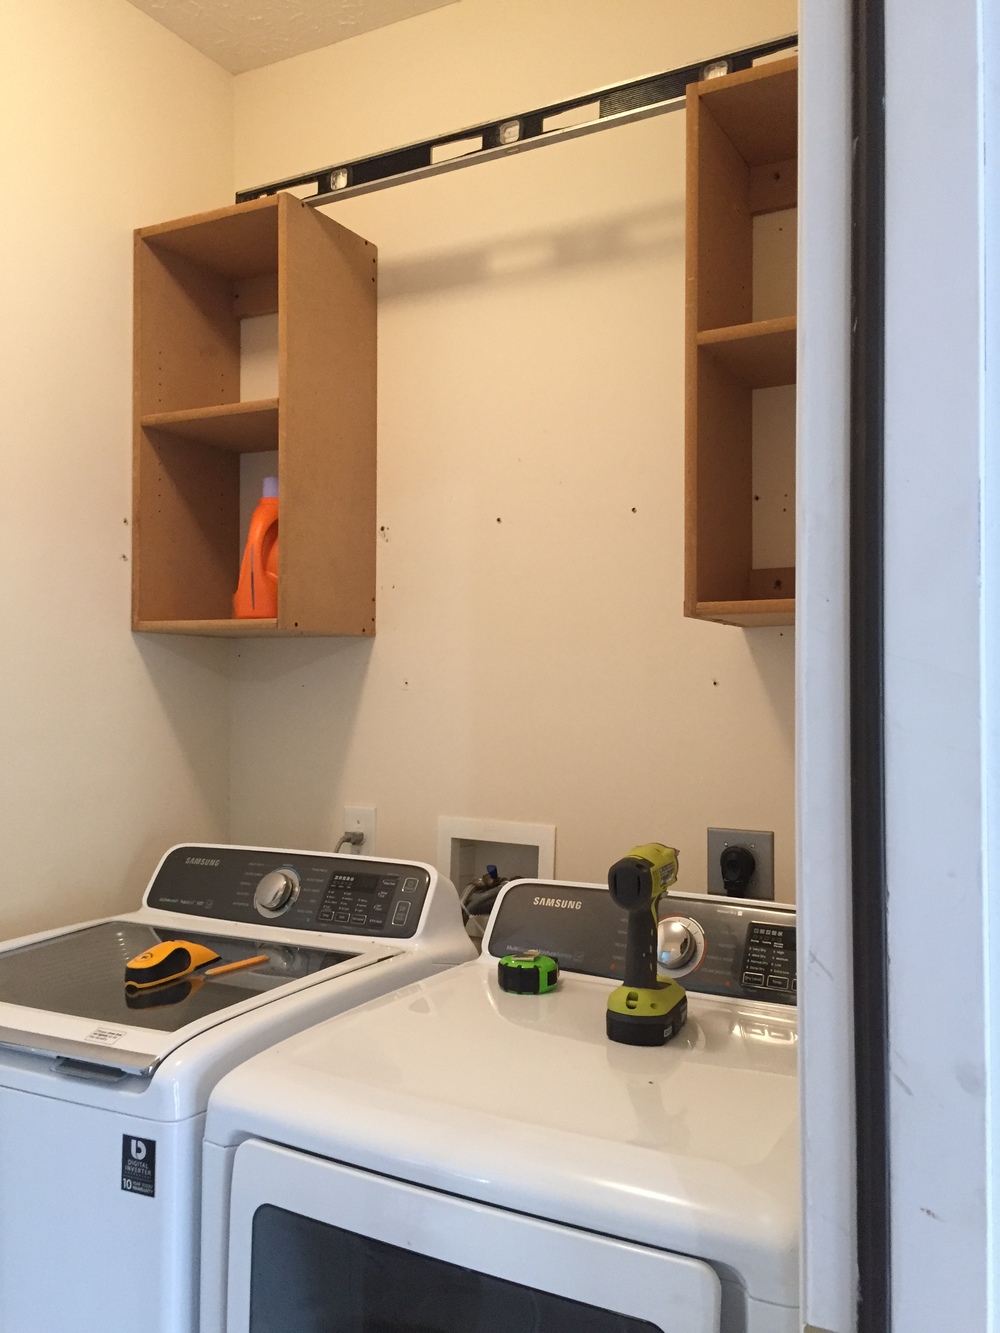 Upper Cabinets Laundry Room Makeover, Diy Laundry Room Cabinets Plans